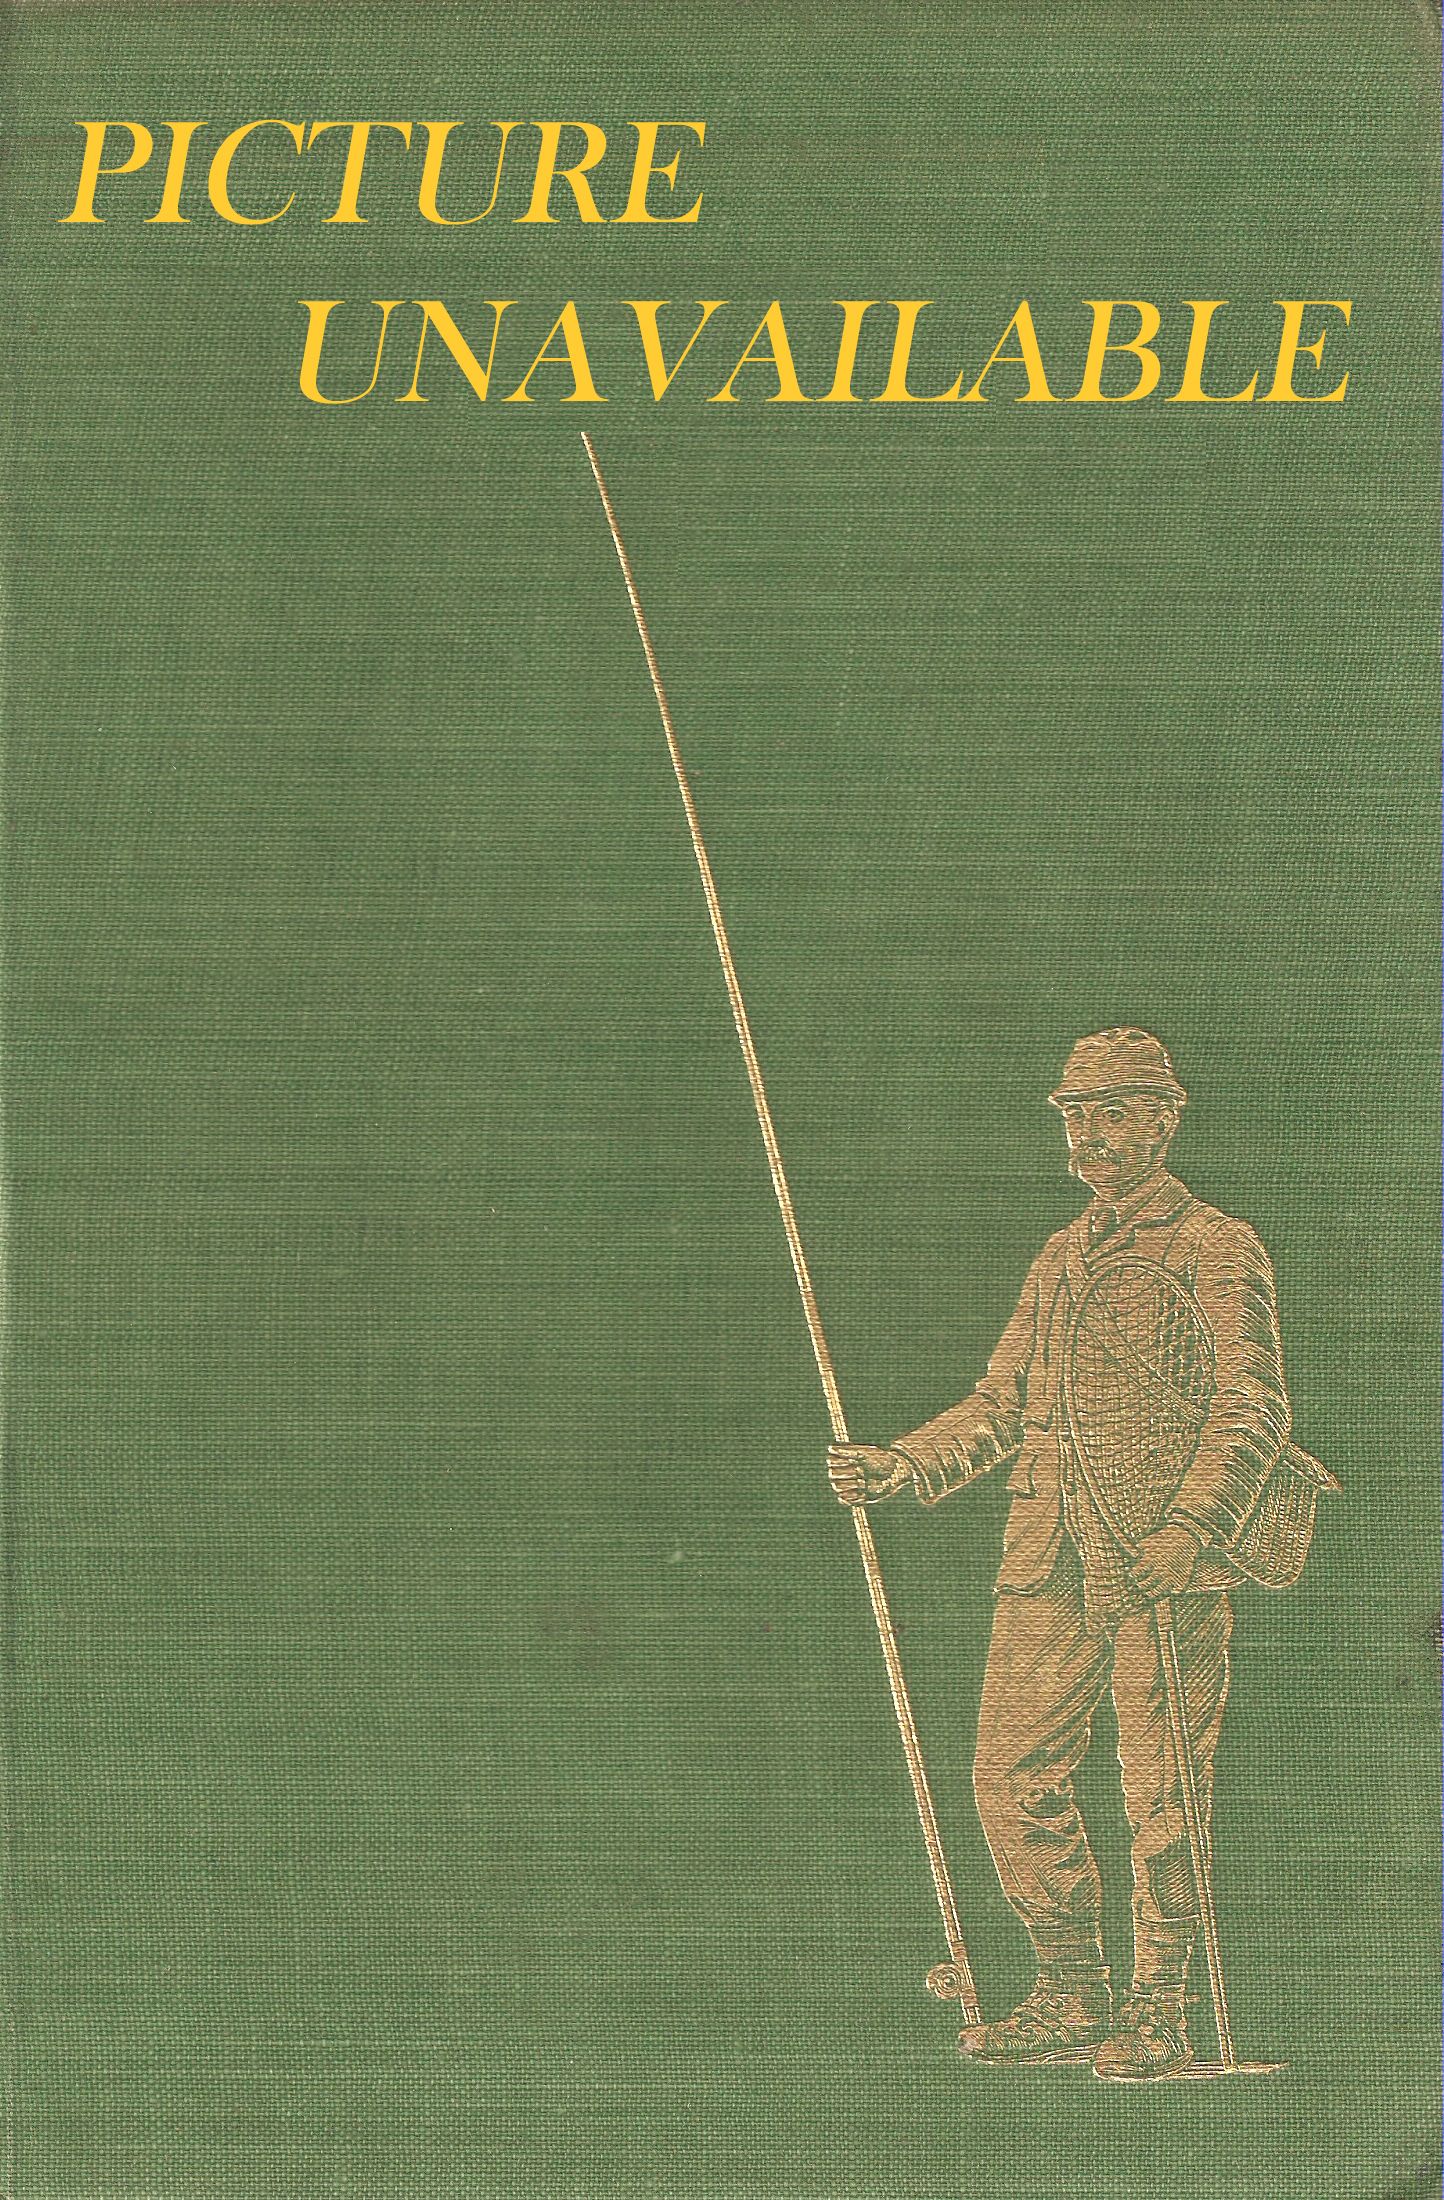 HOW TO FISH: A TREATISE ON TROUT and TROUT-FISHERIES. By W. Earl Hodgson.